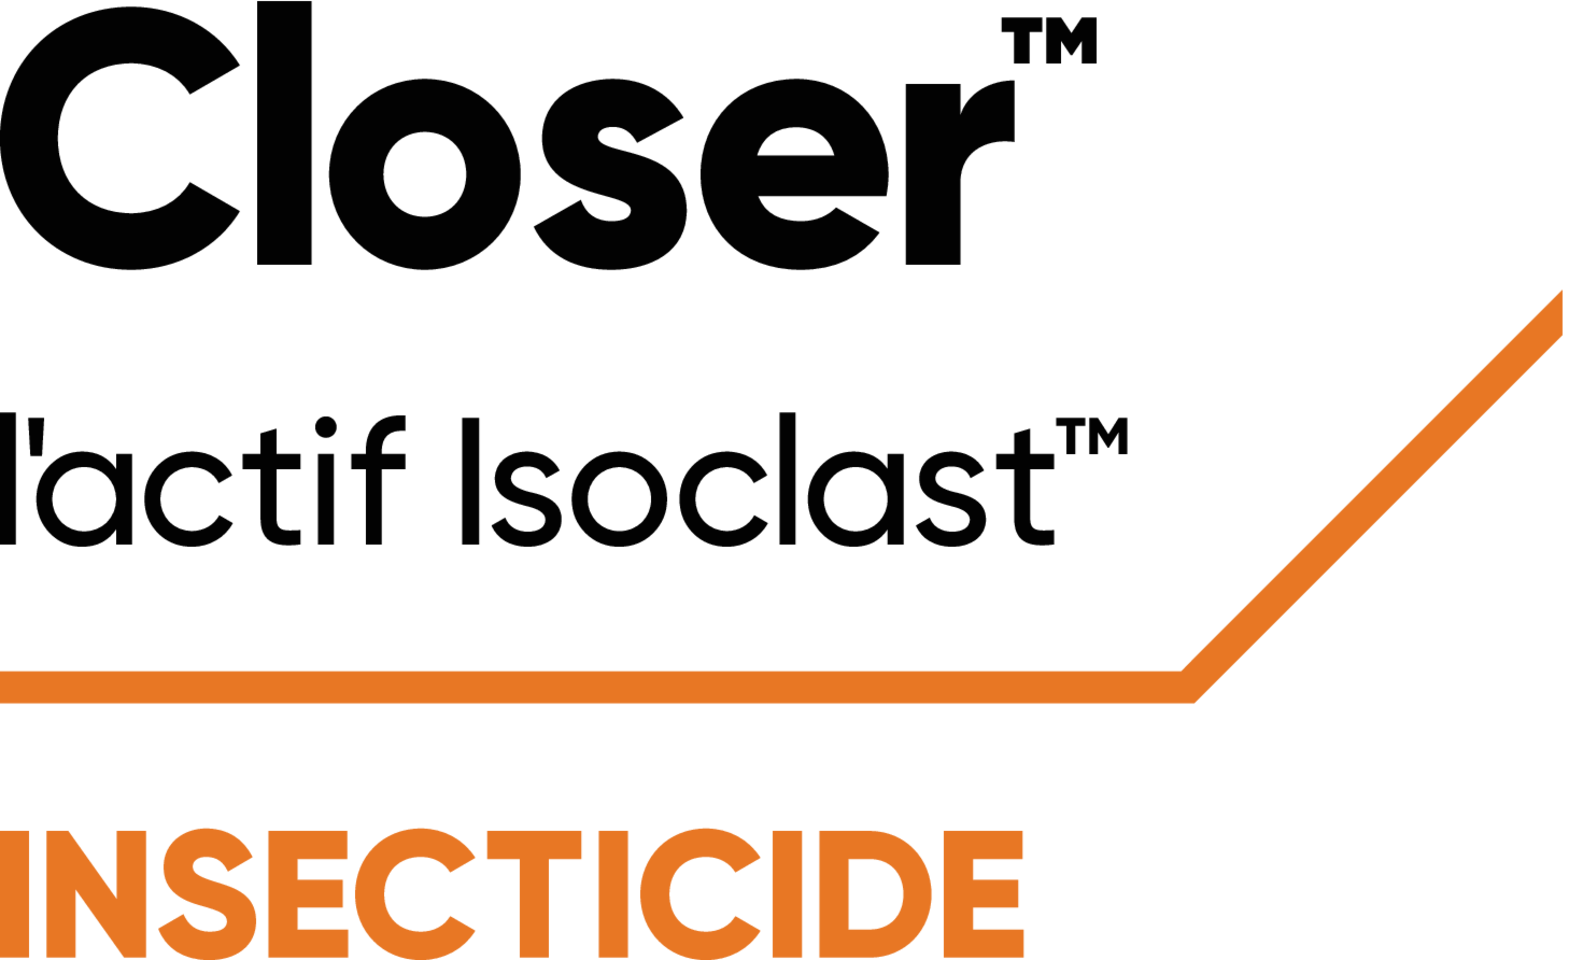 Closer insecticide logo